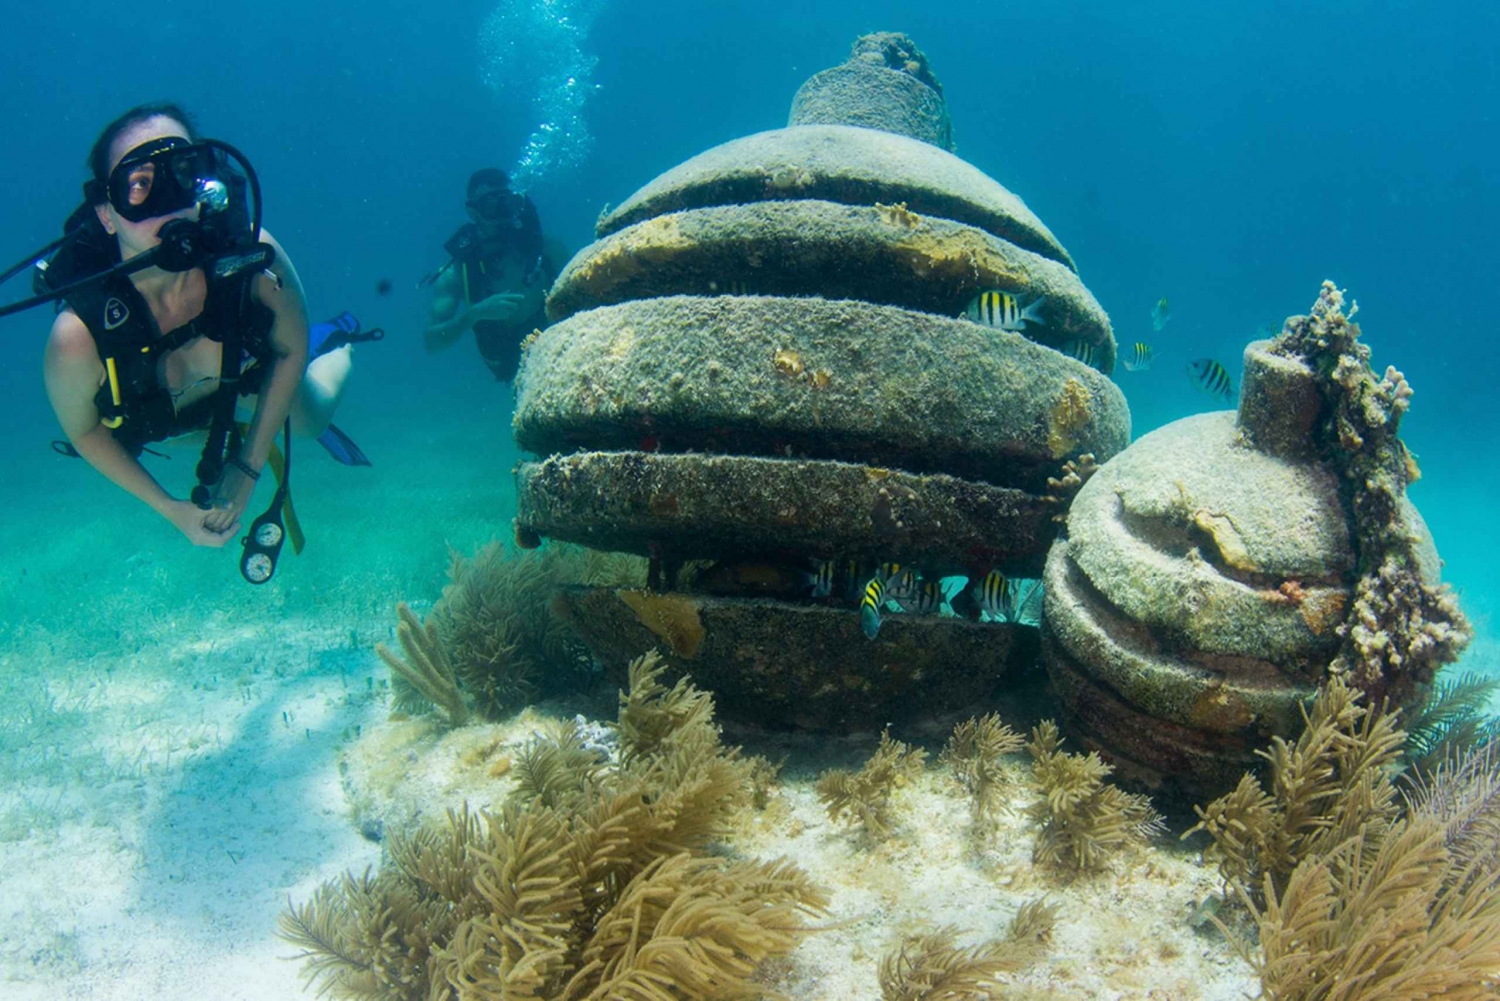 Cancún: Underwater Museum & Reef for Certified Scuba Divers